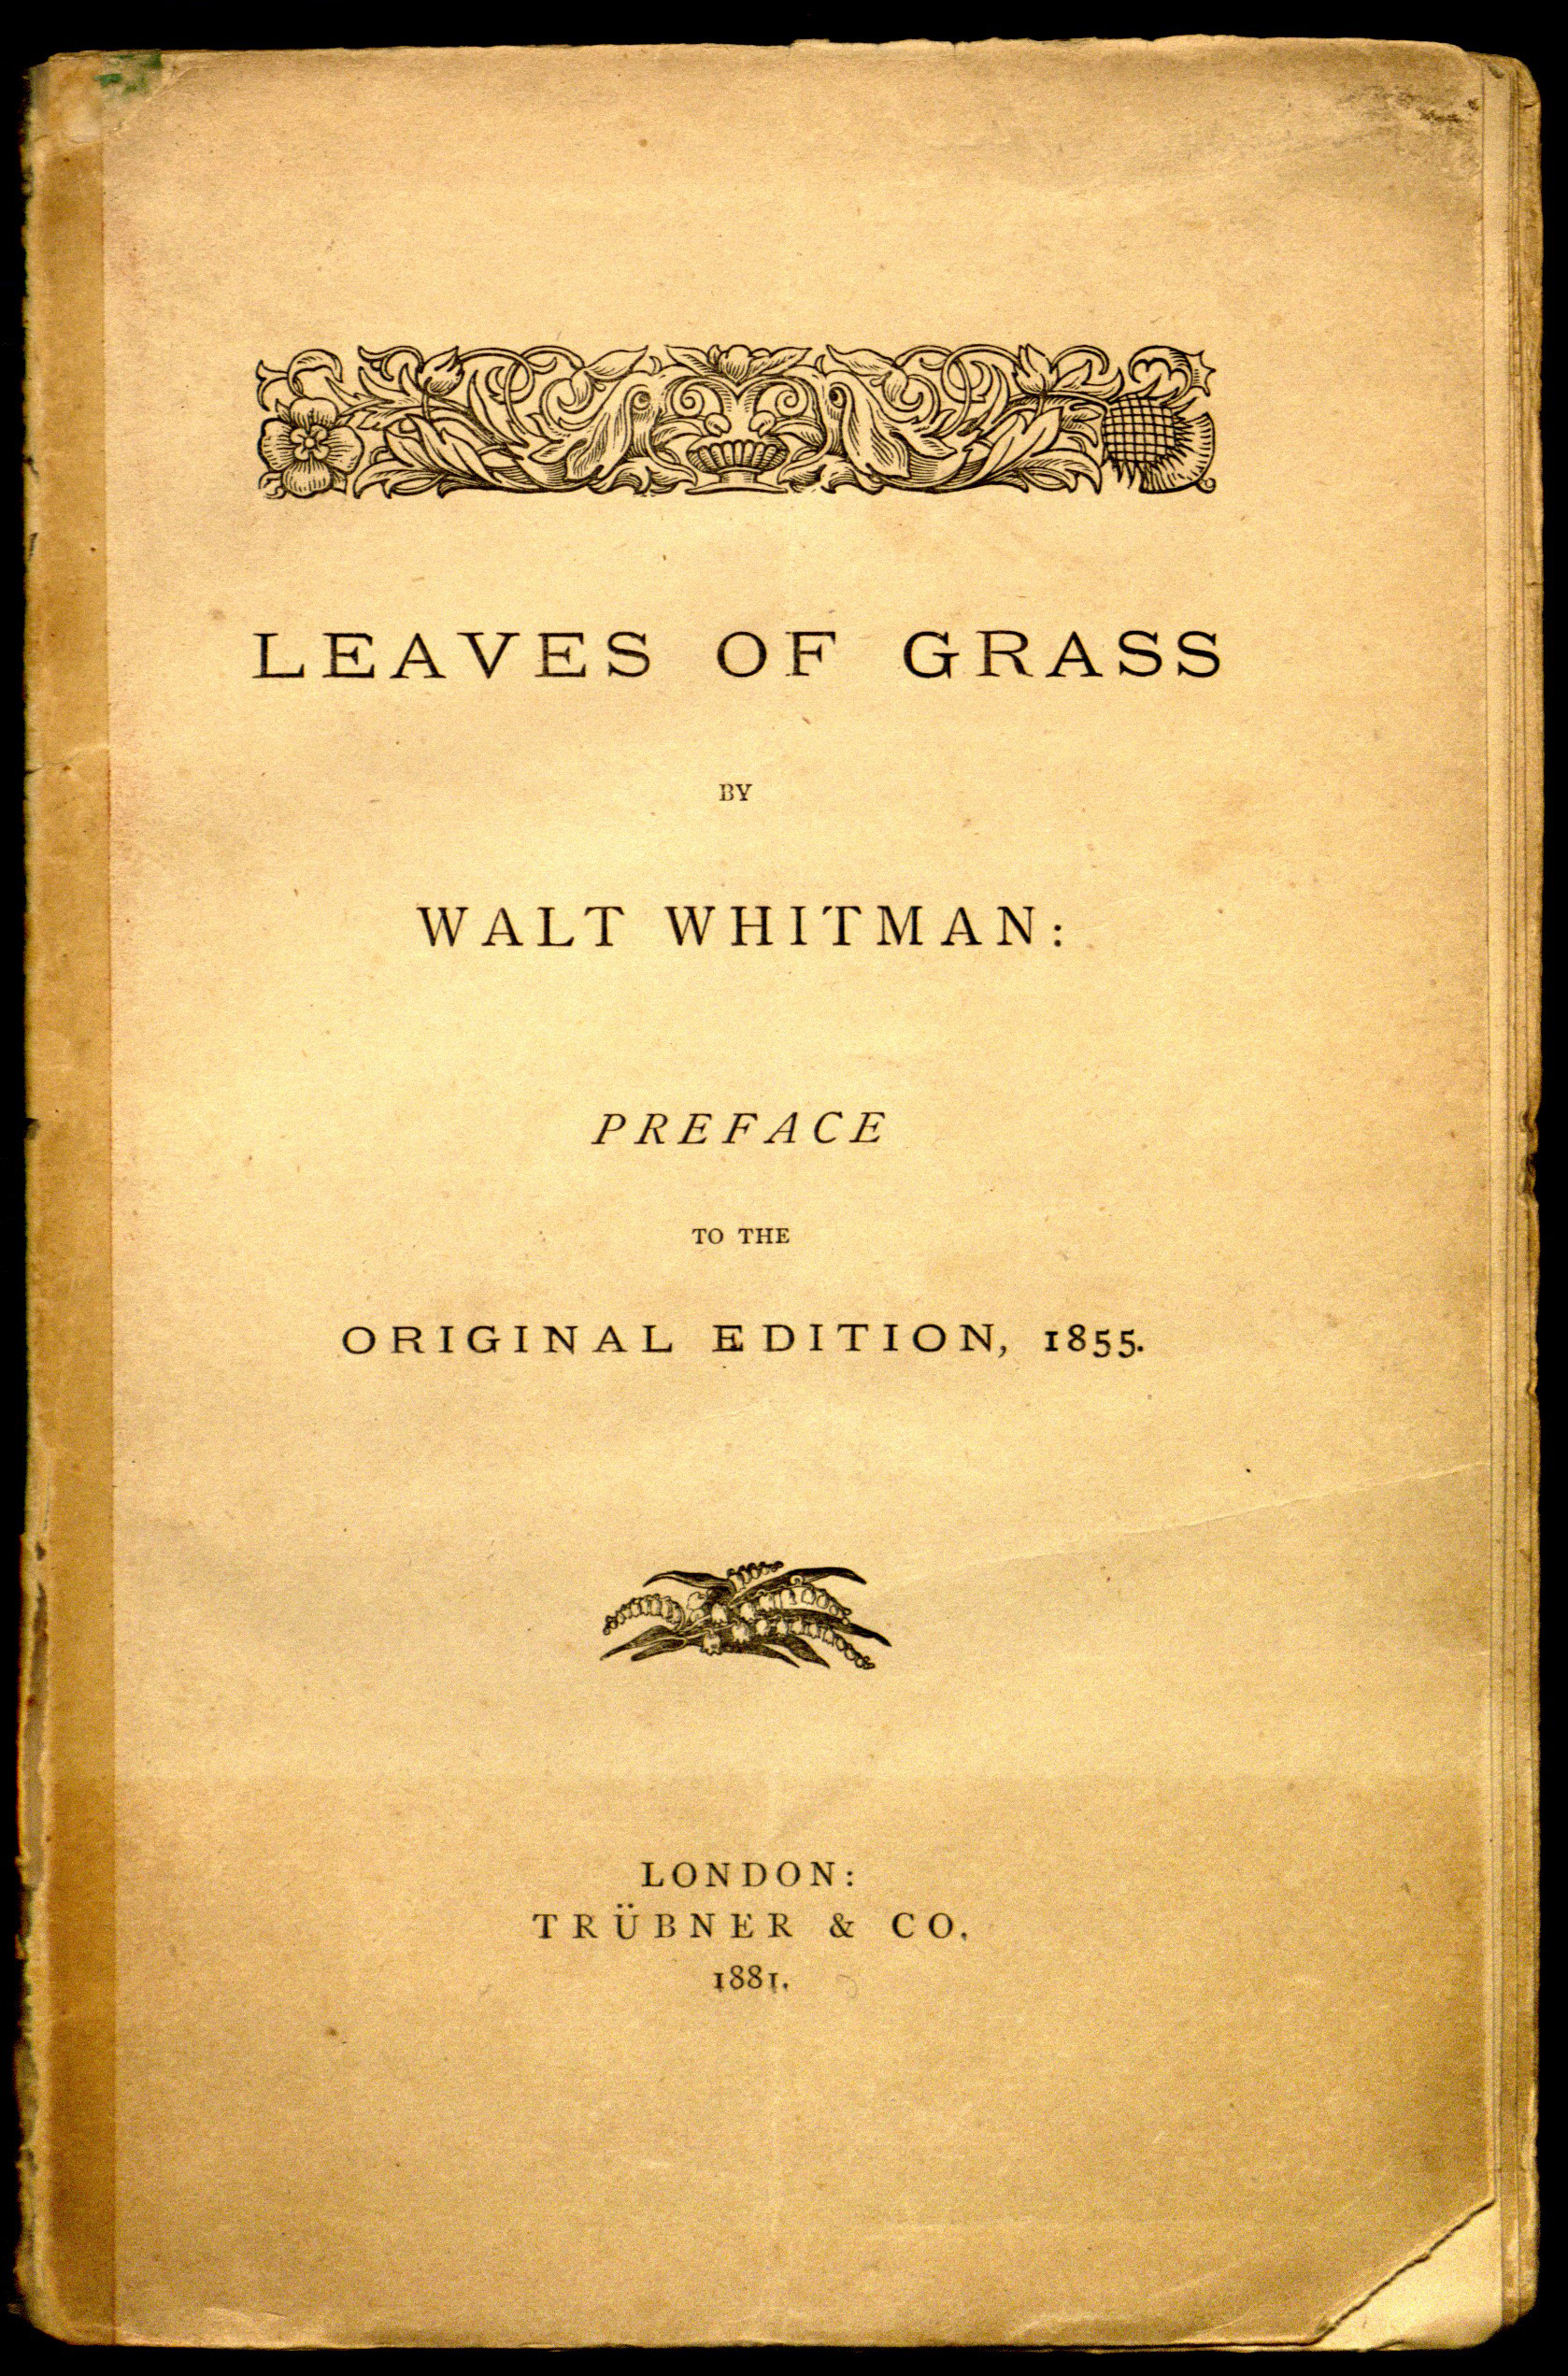 Preface of edition printed in London